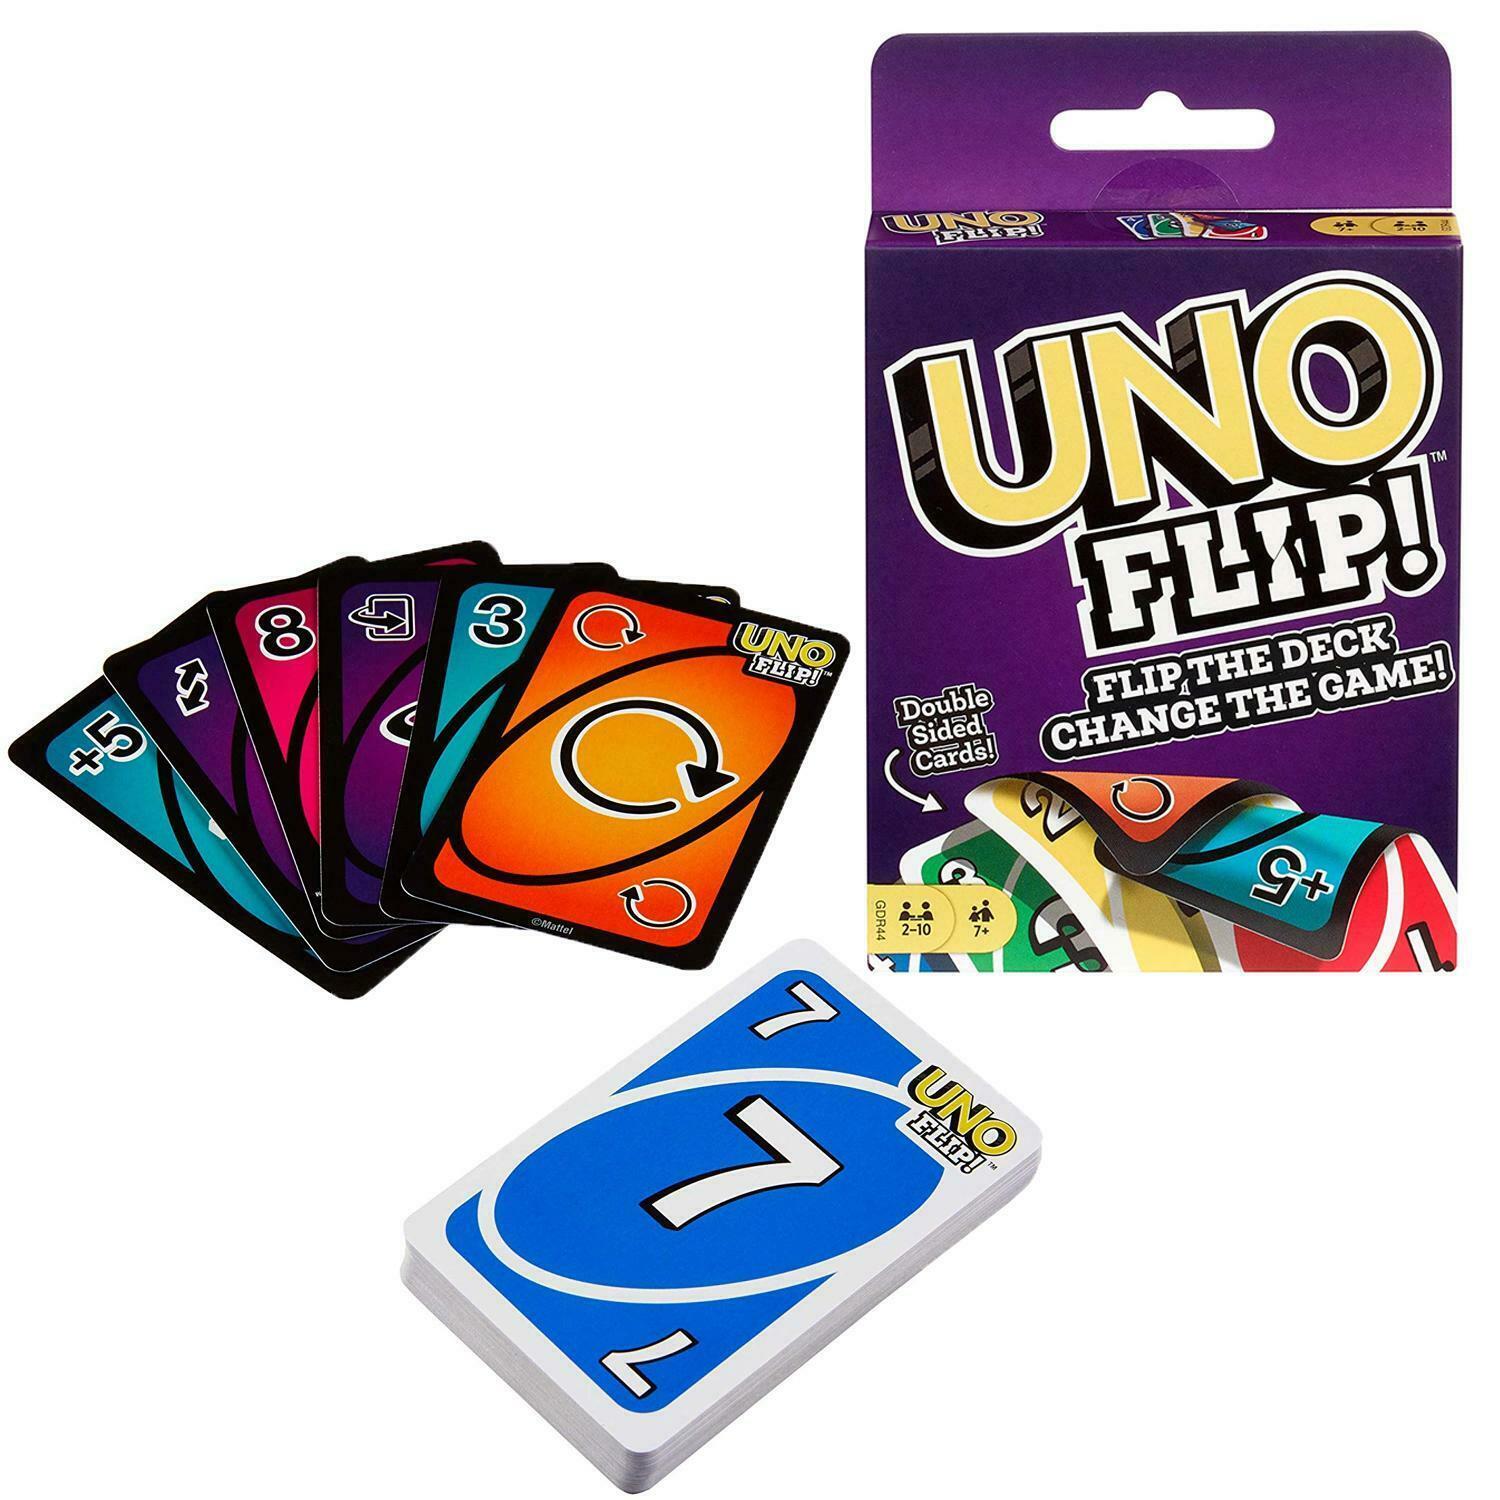 UNO Flip! Card Game Flip The Deck Change The Game No 1 Family Fun Playing Time